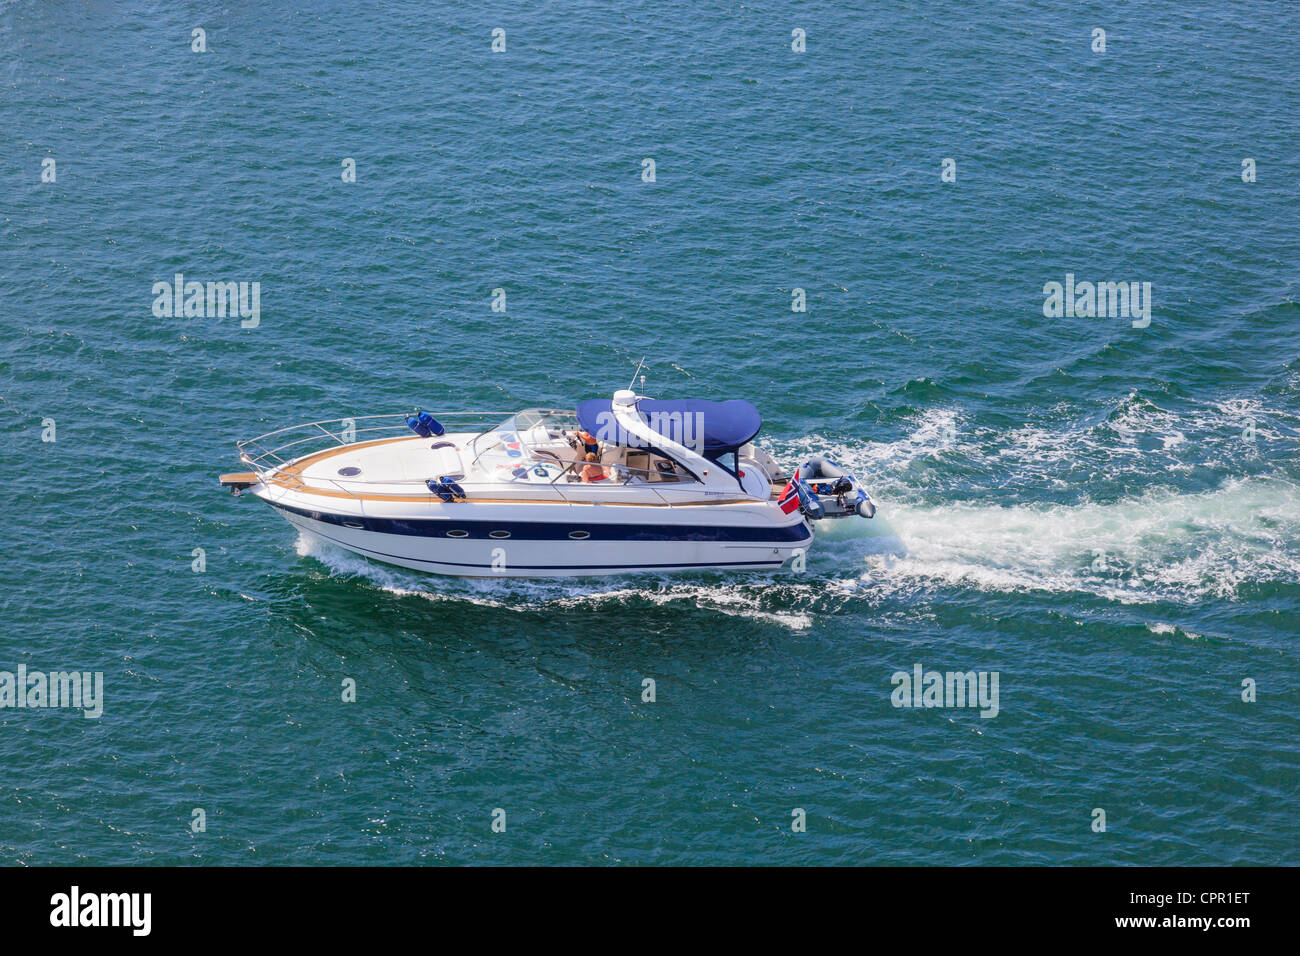 Motorboat on the Sea Stock Photo